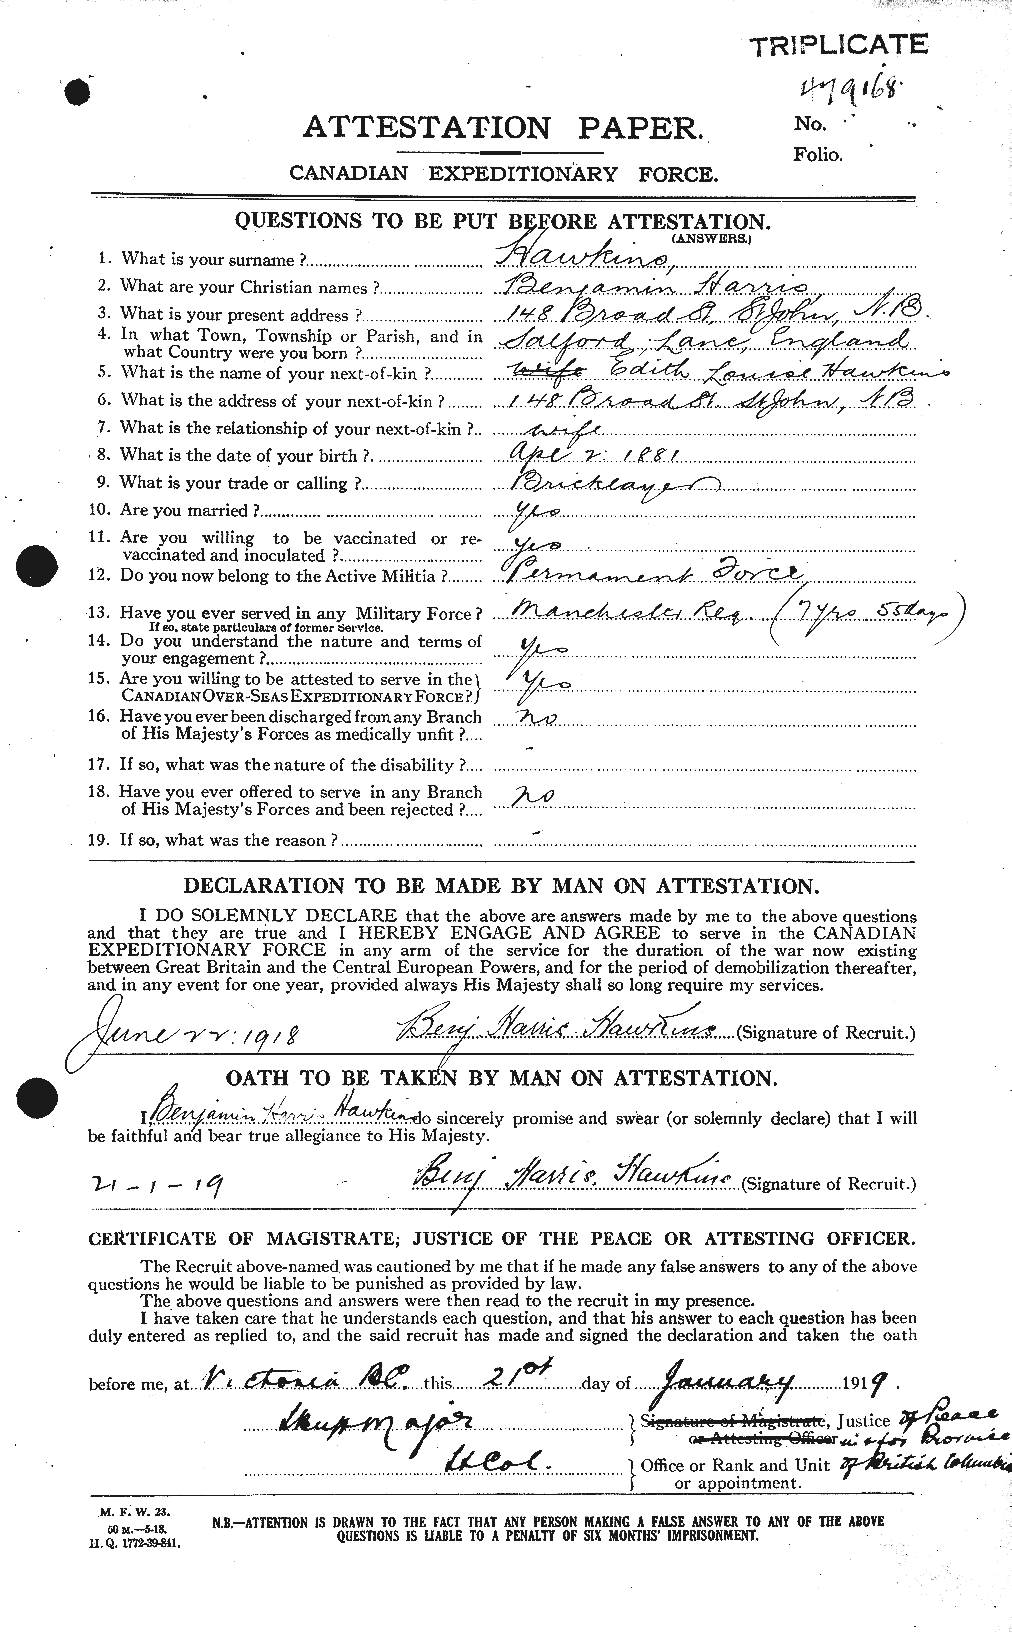 Personnel Records of the First World War - CEF 384634a